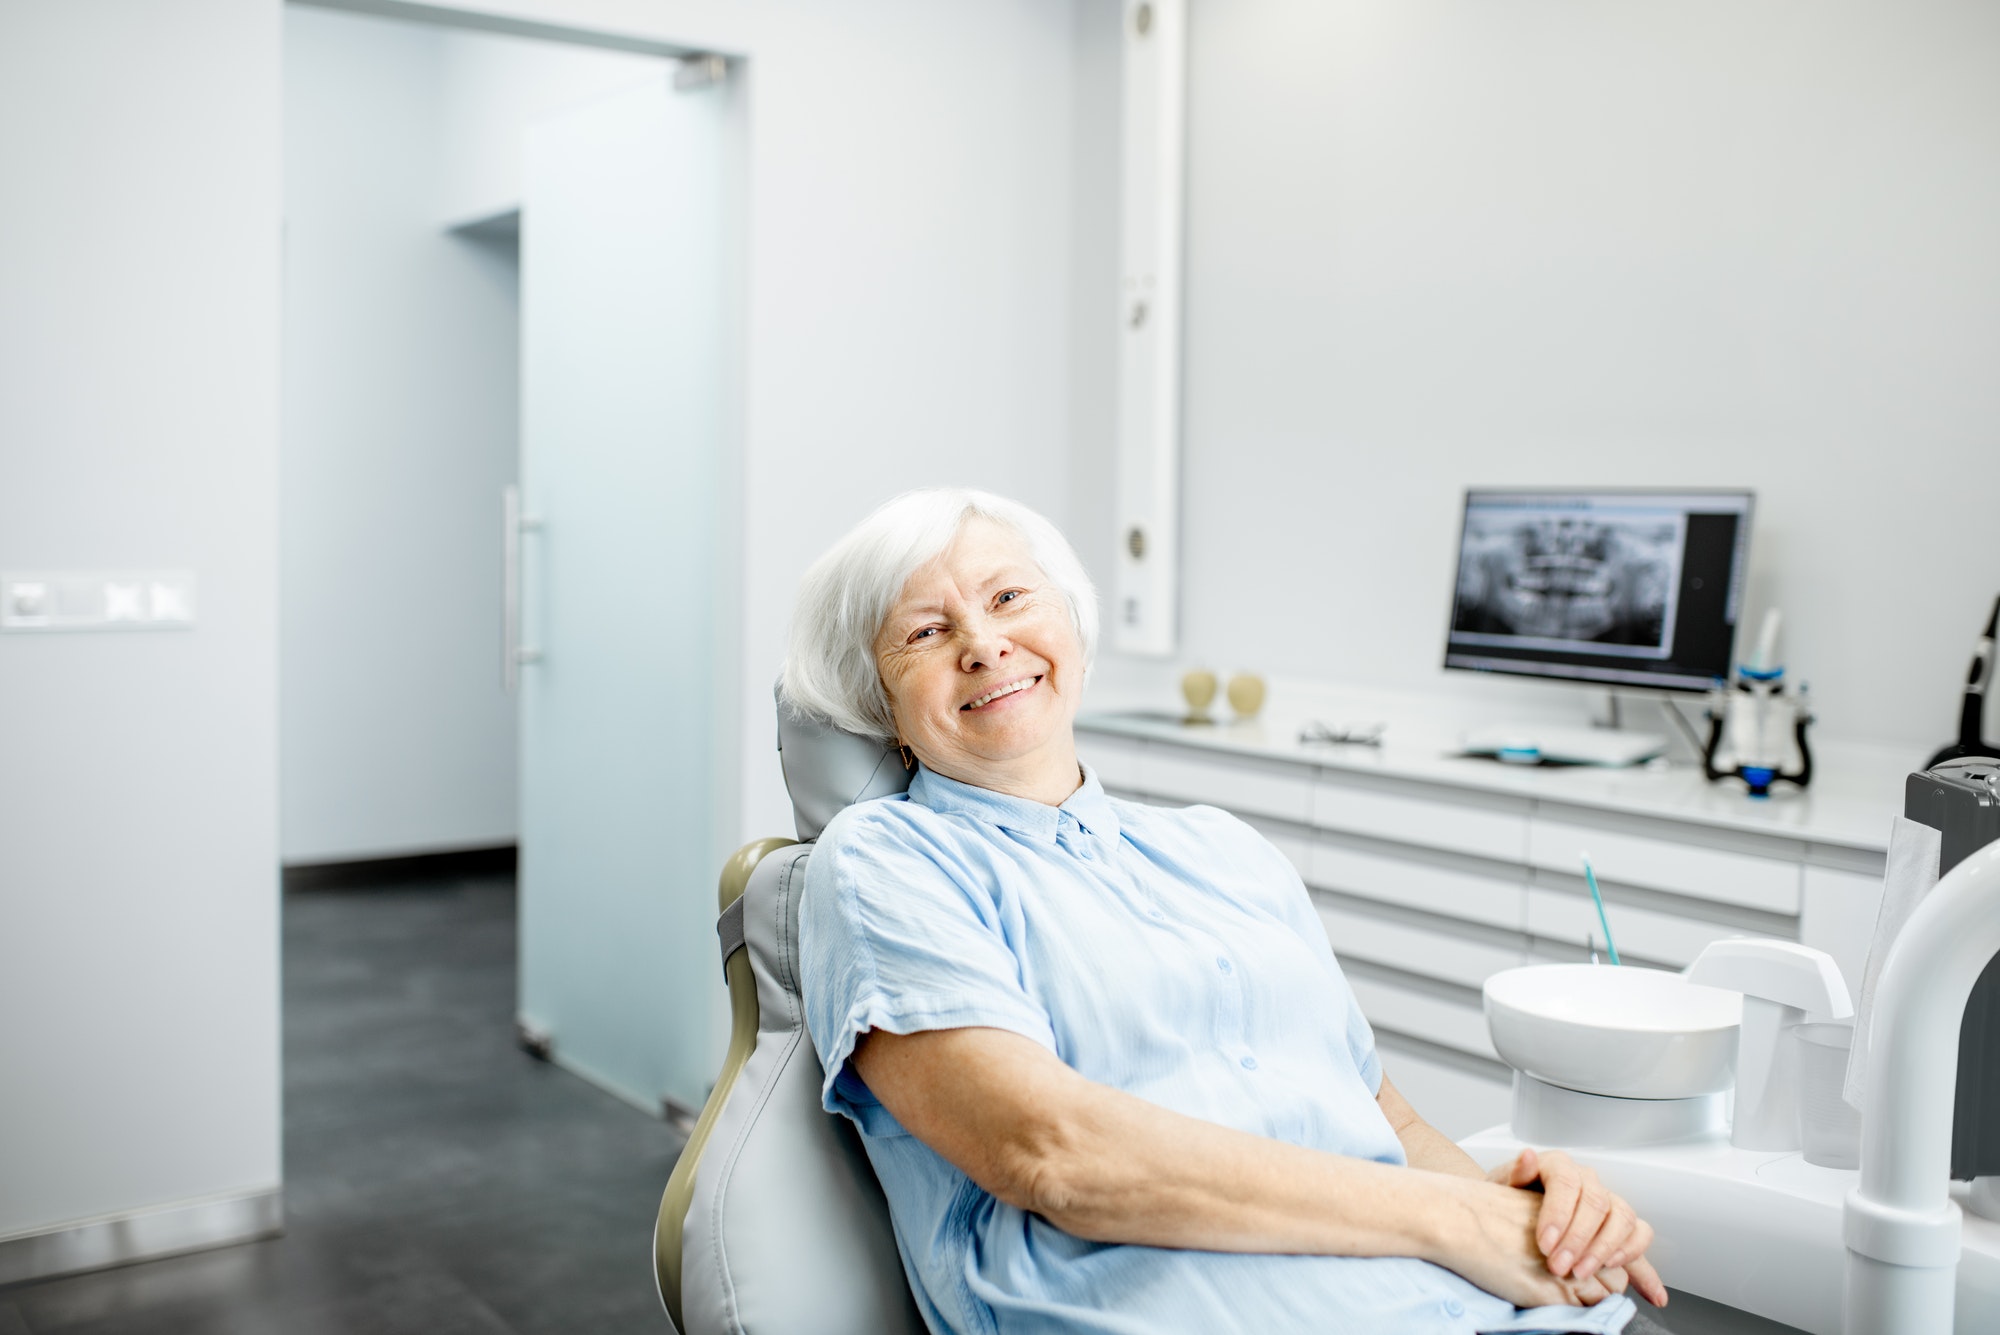 Portrait of a senior woman at the dental office